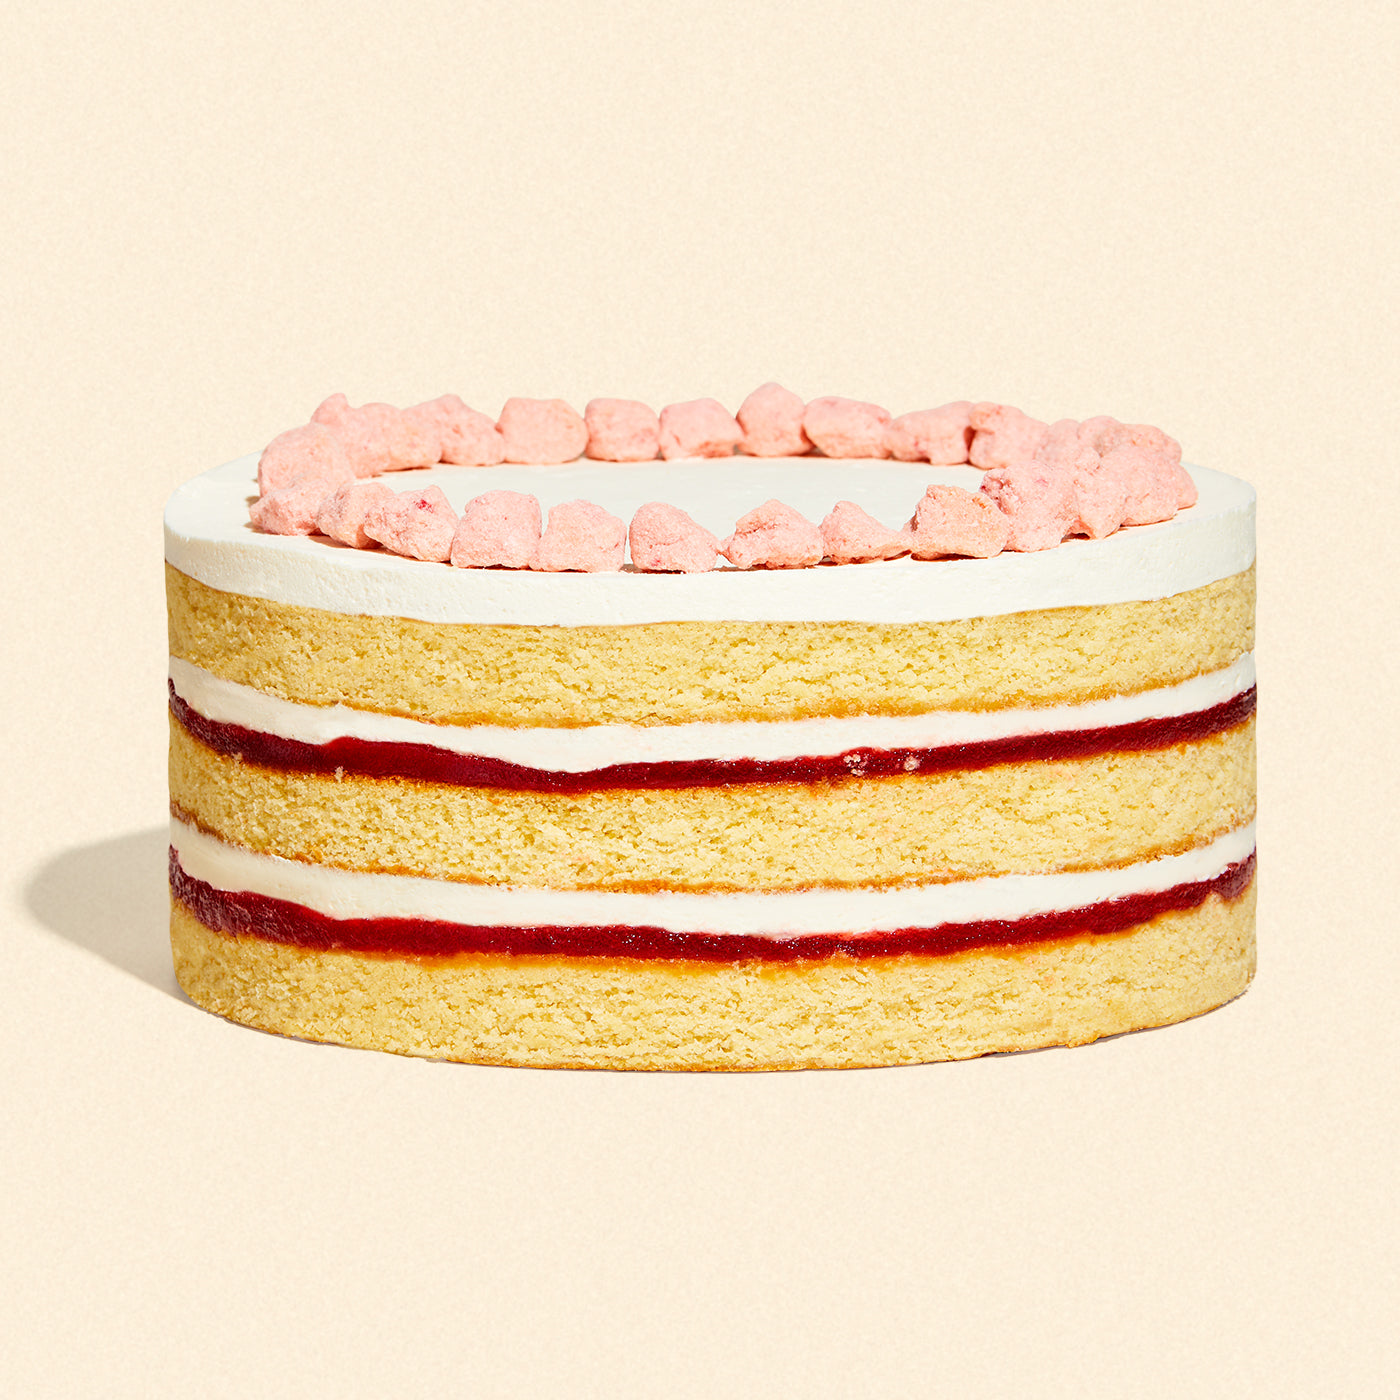 Strawberry Shortcake Cake 10-inch Overview